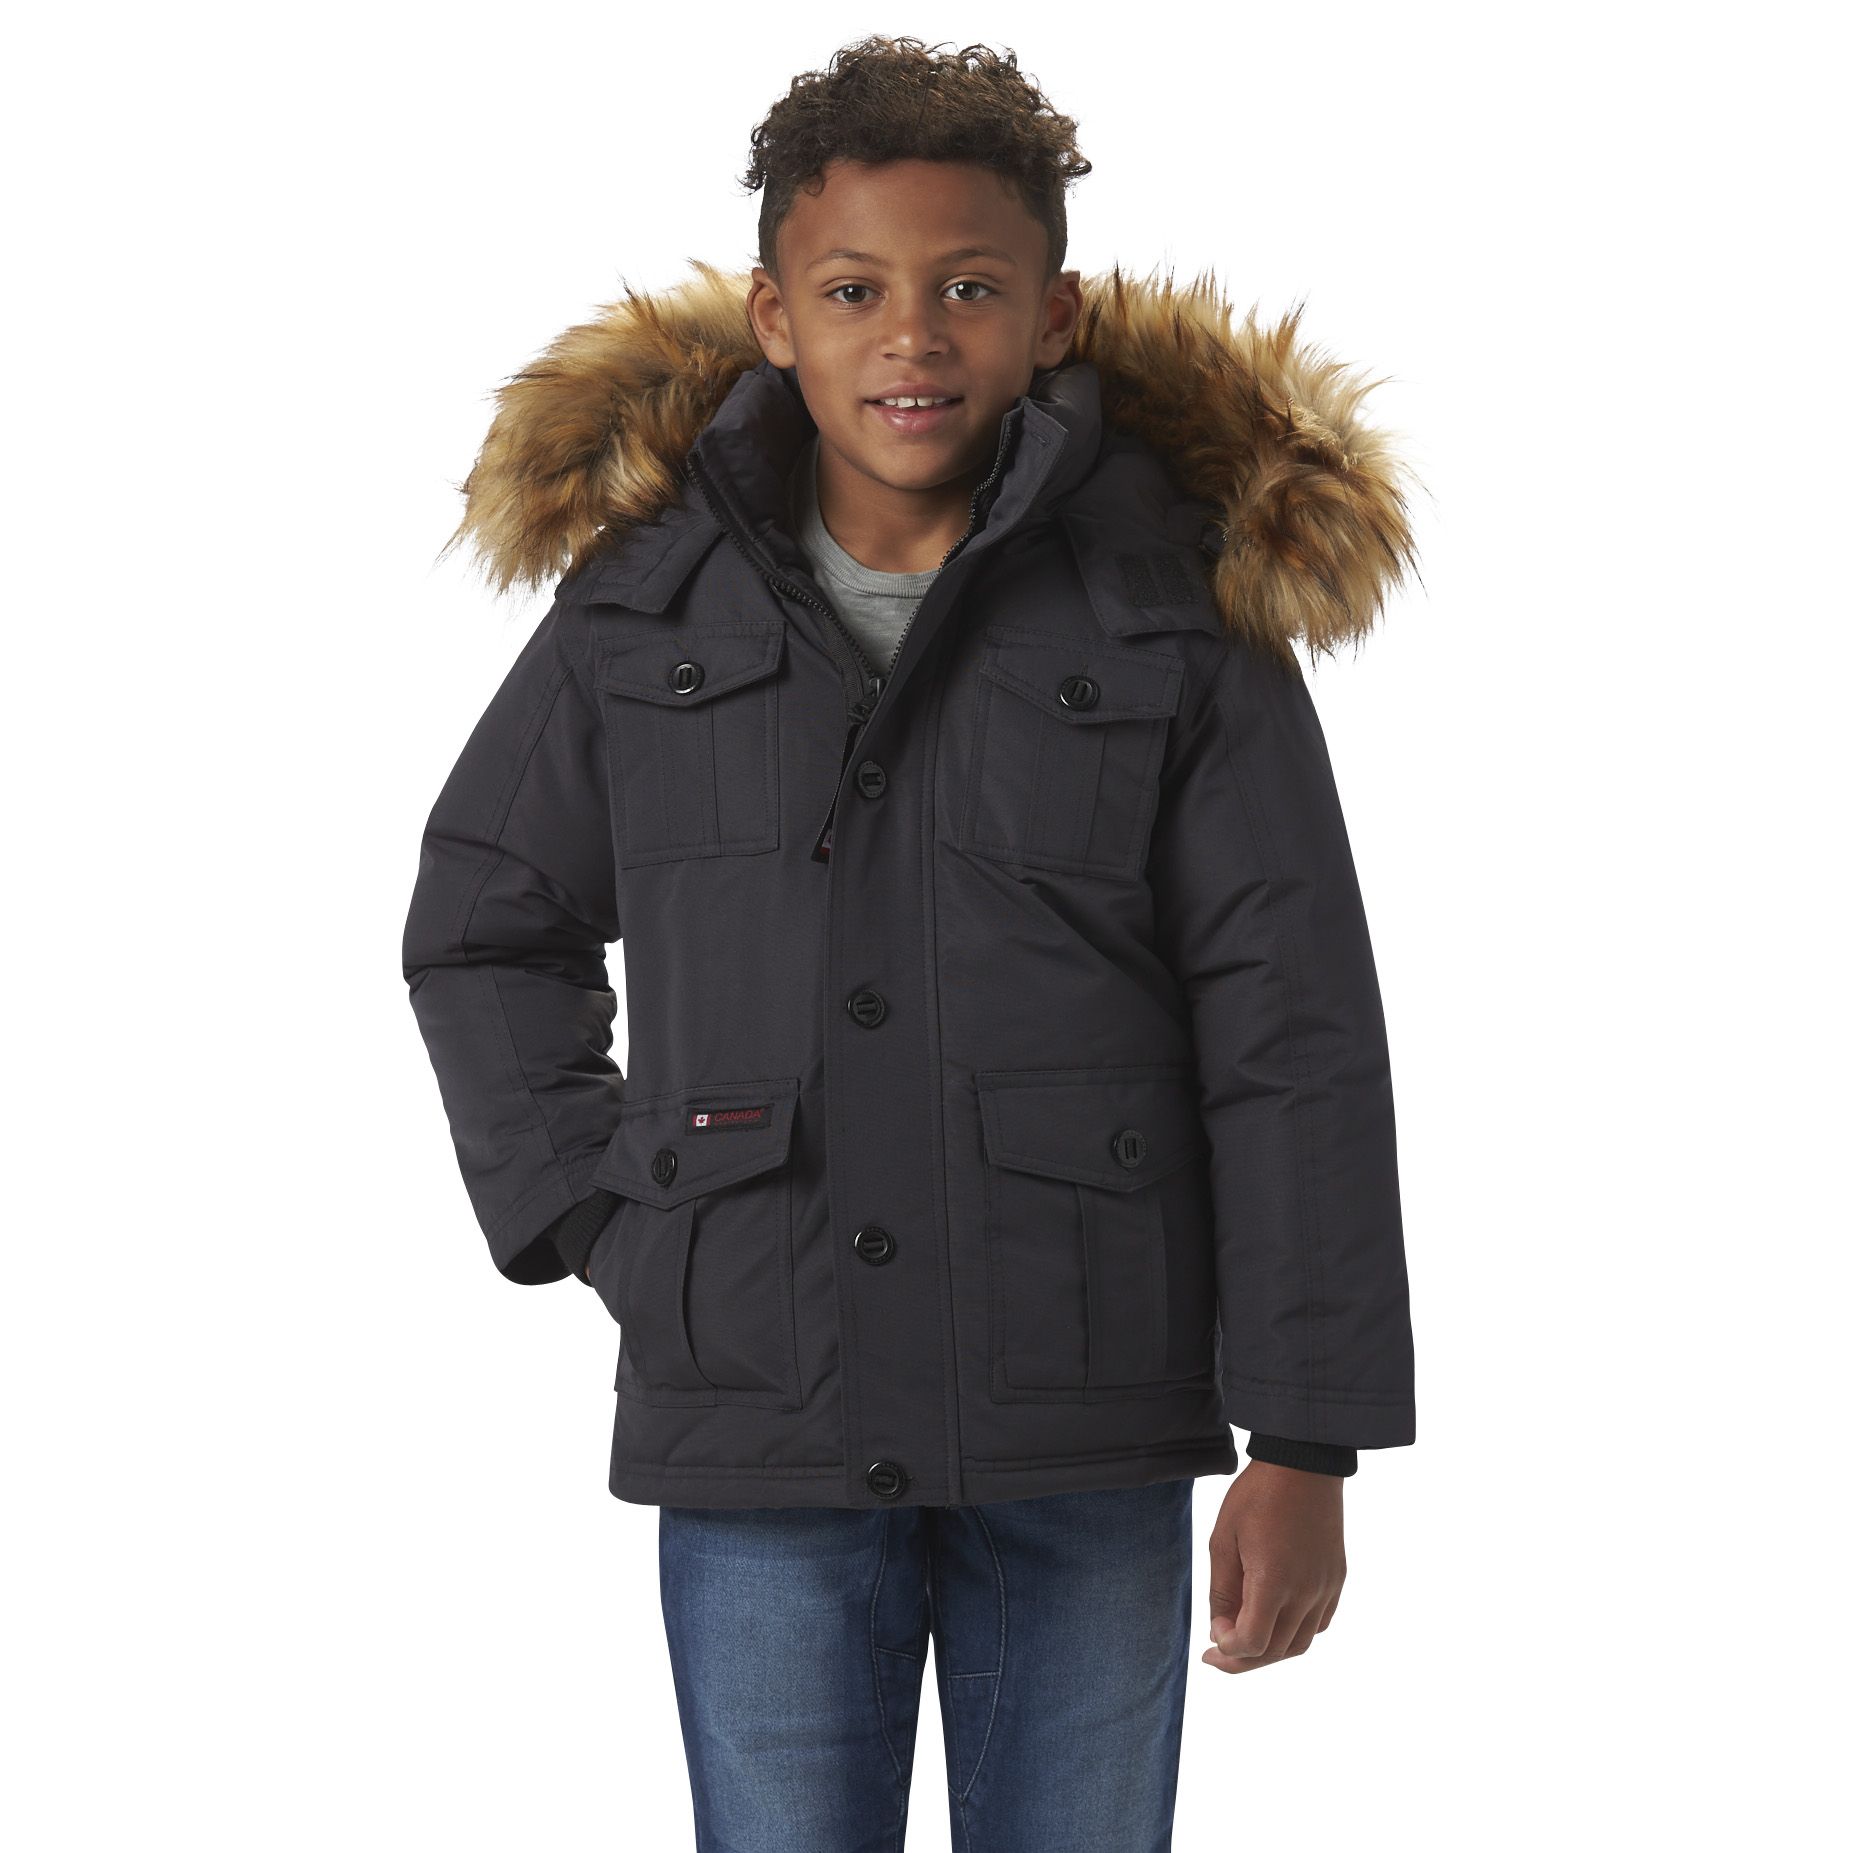 CANADA WEATHER GEAR Boys' Zipped Snap Flap Insulated Parka